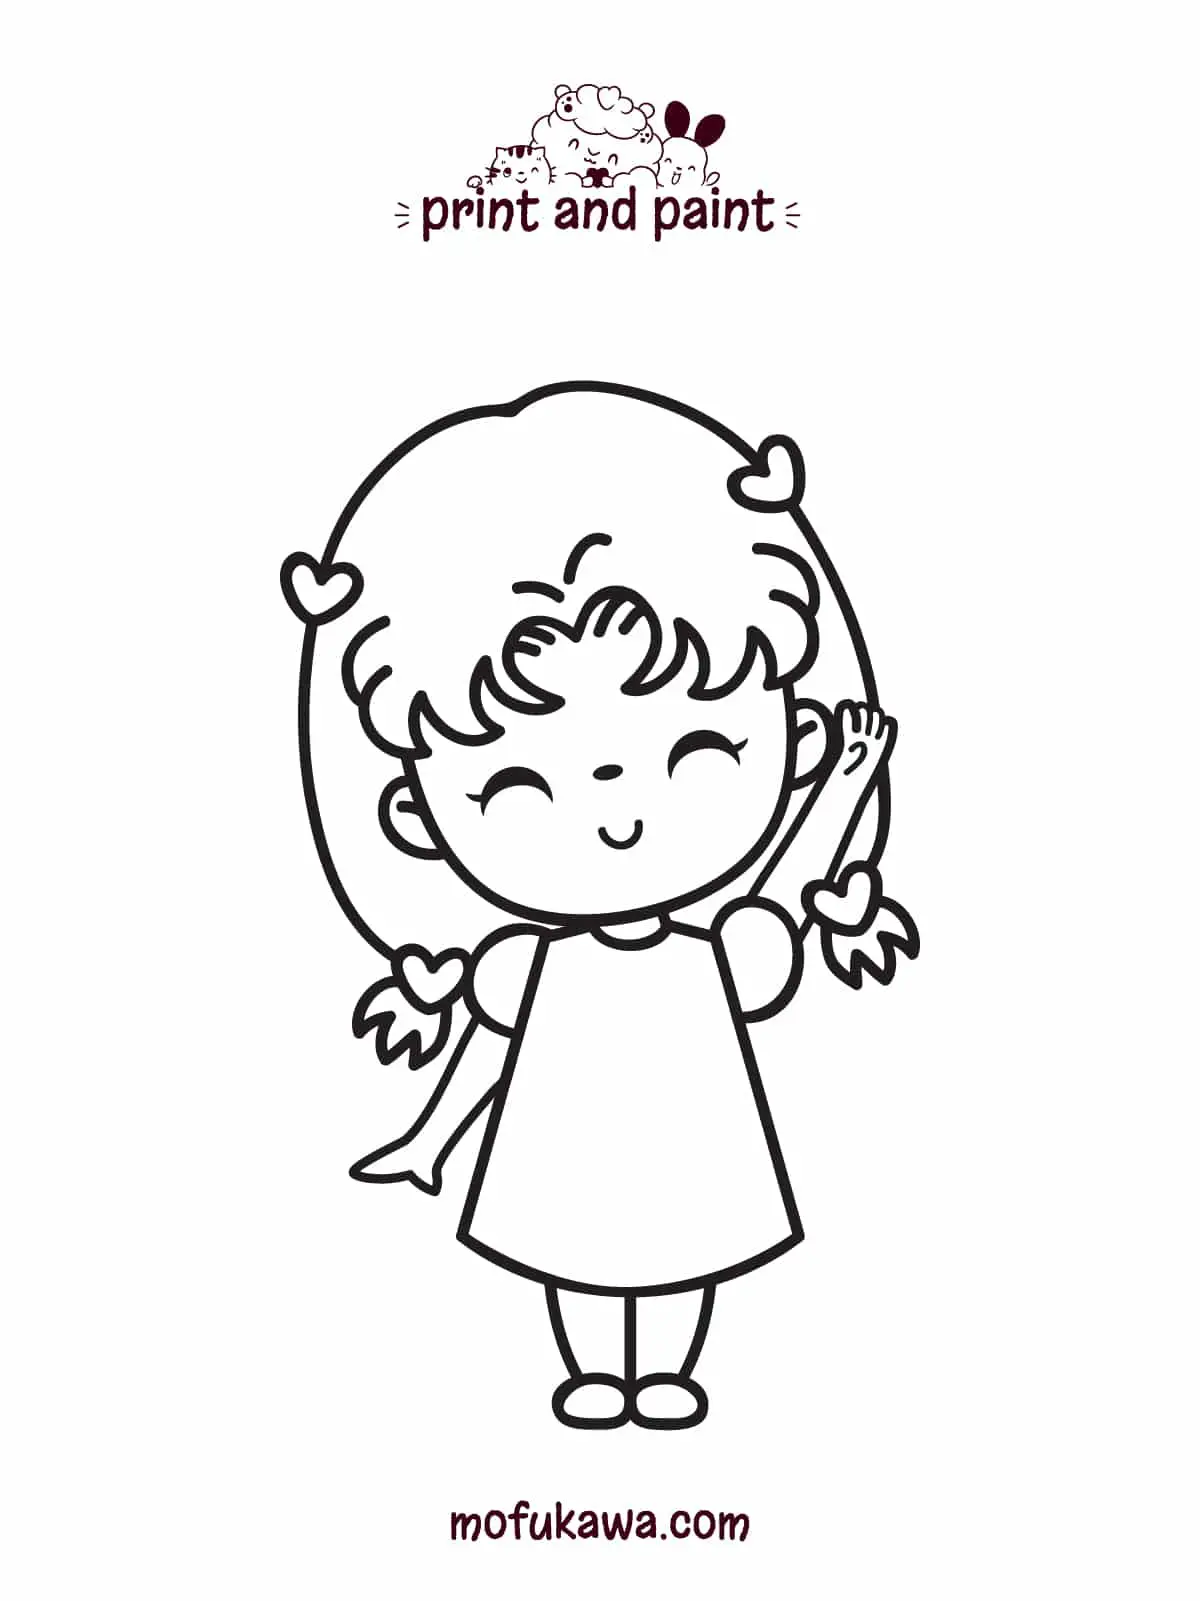 How to Draw a Girl - Easy Drawing Art-saigonsouth.com.vn